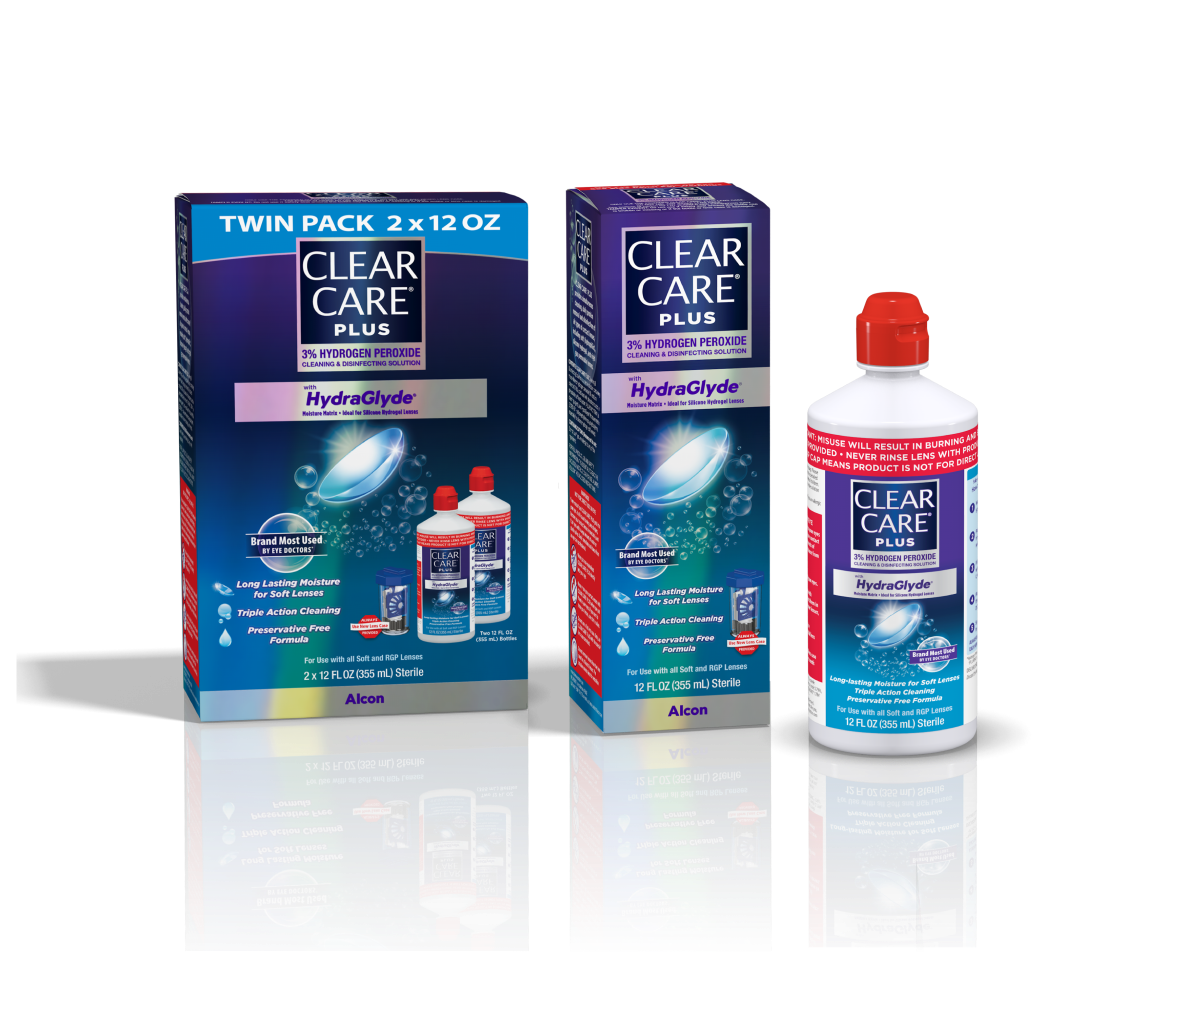 Two product boxes and bottle for Clear Care Plus contact solution with HydraGlyde by Alcon. Twin Pack 2 x 12 oz and single bottle box.